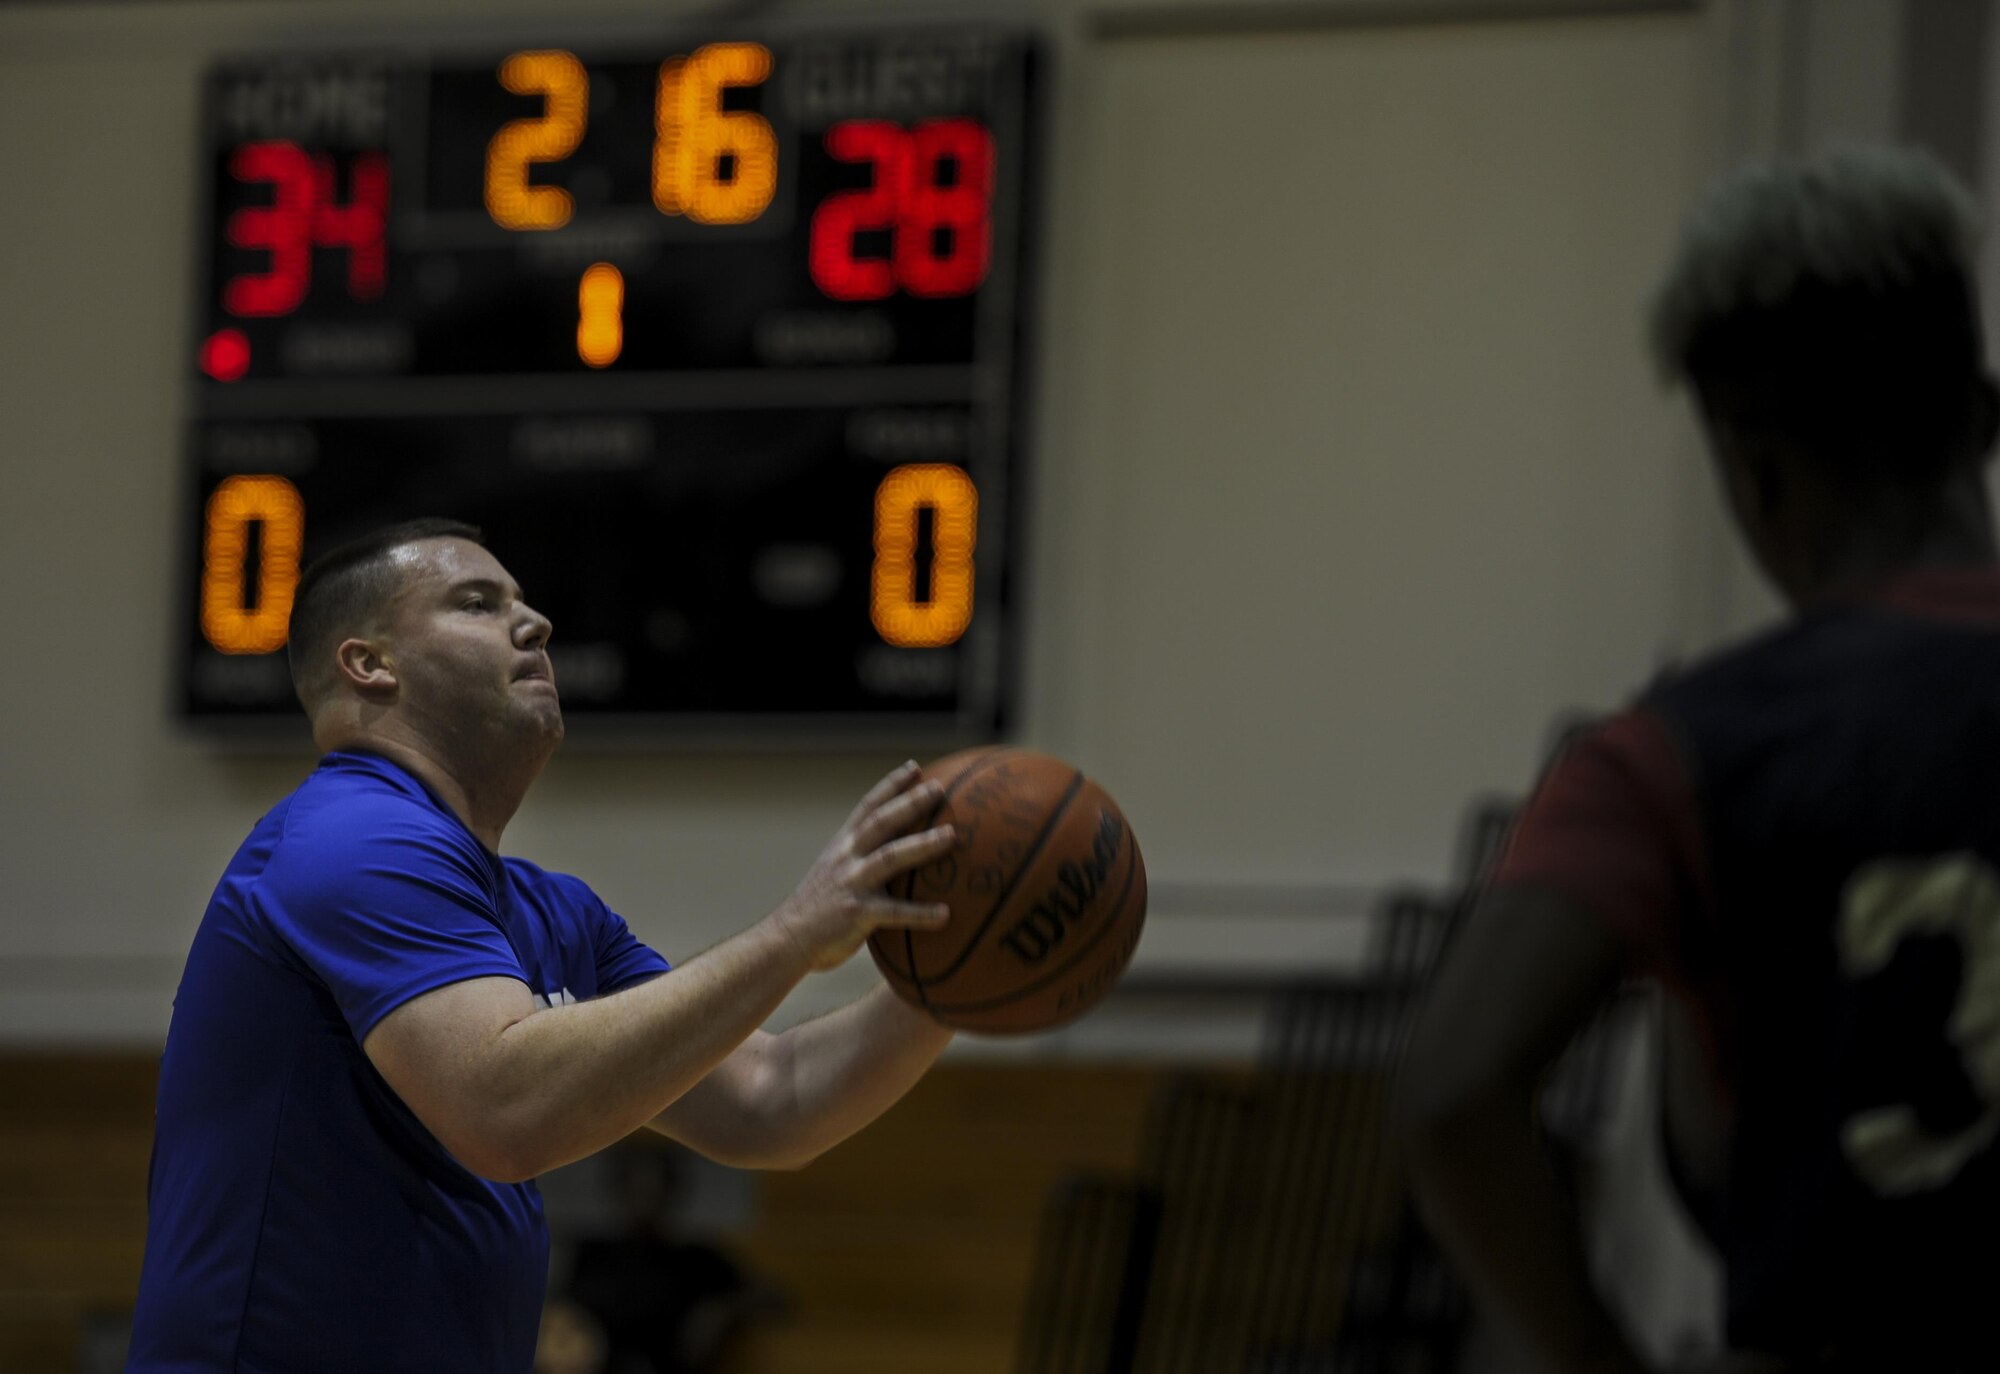 Christopher Rex, a center for the 1st Special Operations Contracting Squadron intramural basketball team, prepares to shoot a free throw during a basketball game at Hurlburt Field, Fla., March 3, 2017. The 1st SOCONS defeated the 1st Special Operations Maintenance Squadron 78-62. (U.S. Air Force photo by Airman 1st Class Dennis Spain)